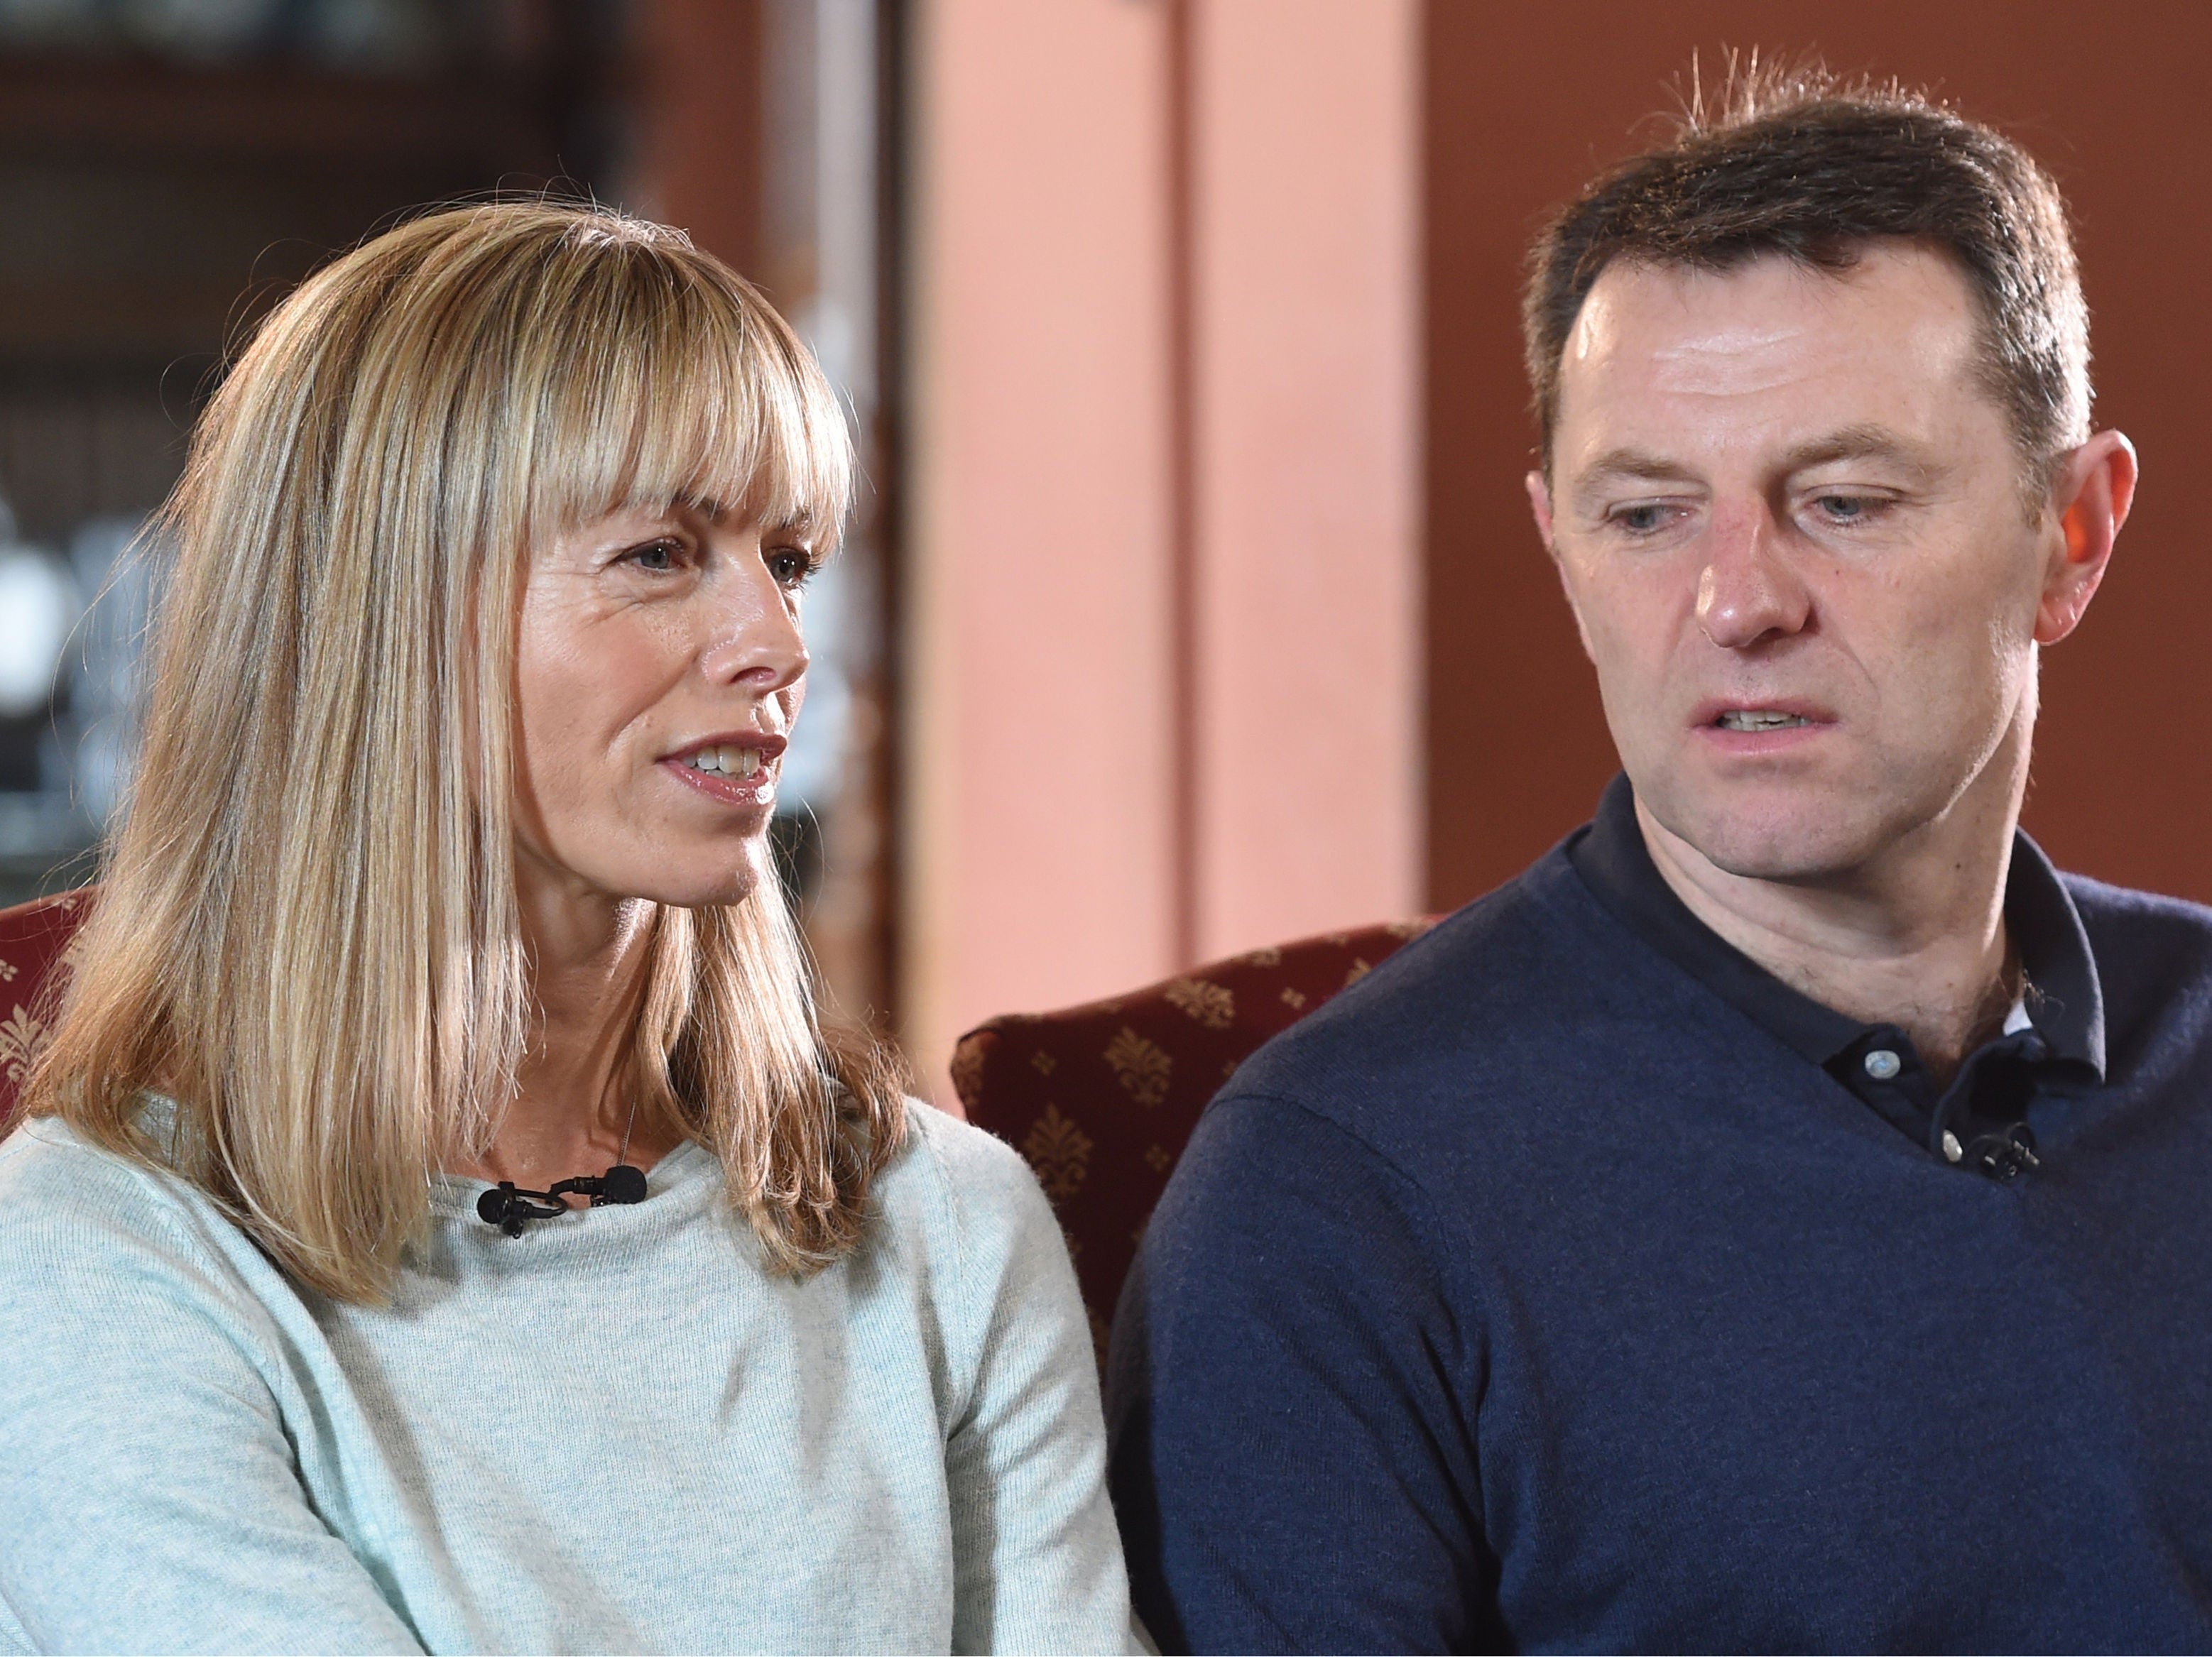 Madeleine McCann’s parents have £750,000 in fund for private search if